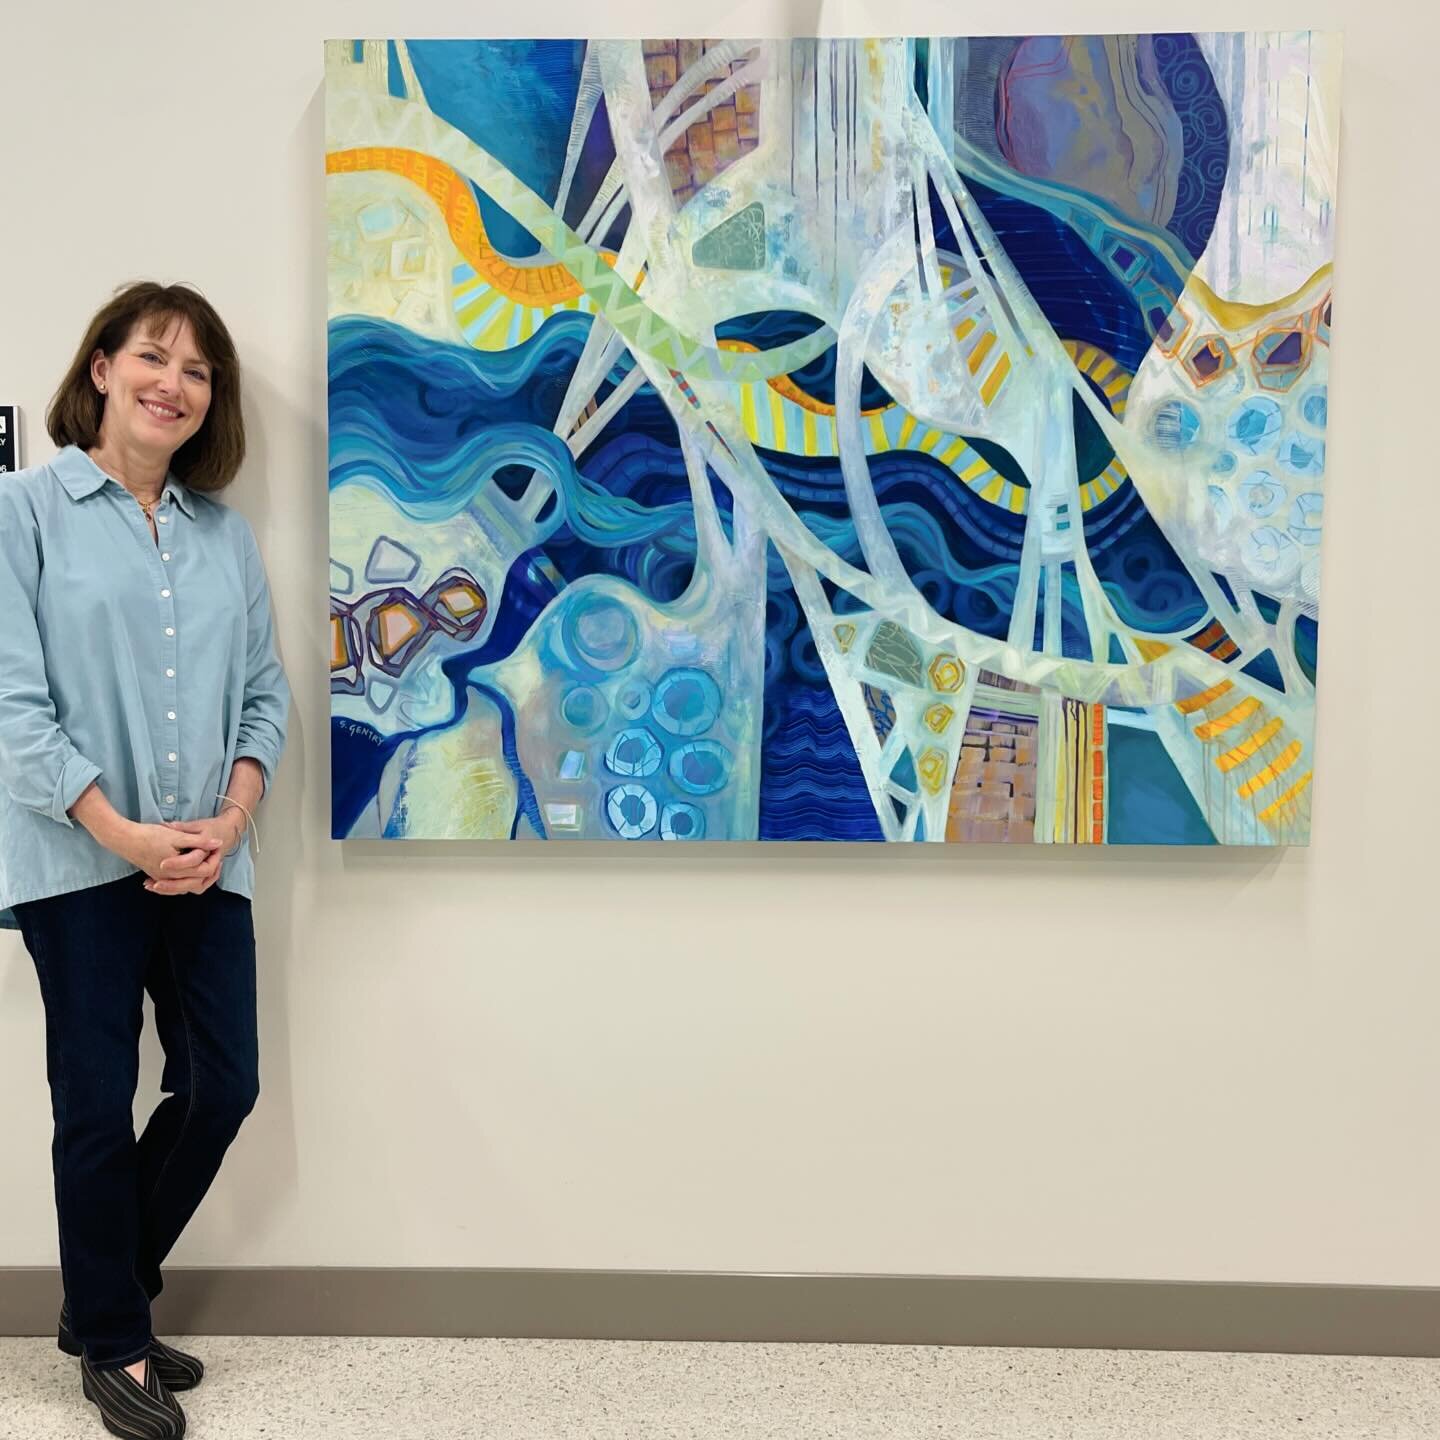 Today was a good day. 

Today marked the culmination of a project that has been in the works for several weeks. Art Group Gallery was honored to have multiple works selected for installation at The Orthopaedic and Spine Hospital at UAMS in Little Roc